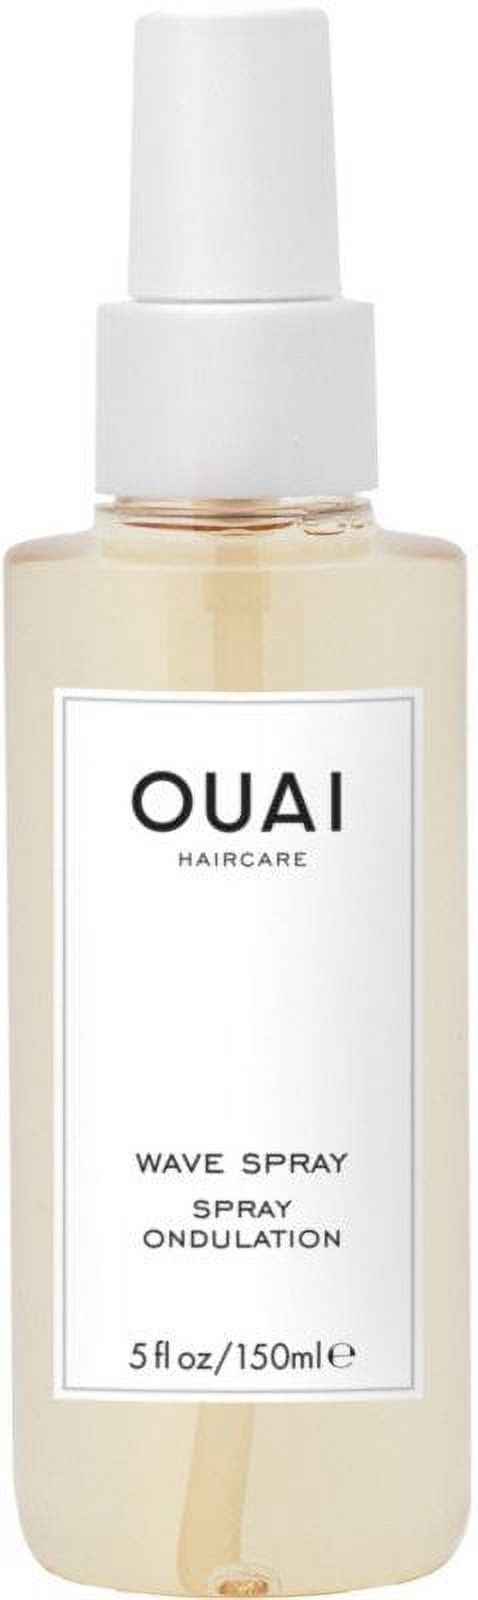 Ouai 1802107 Texture Spray for Hair with Coconut Oil and Rice Protein, 150mm - image 1 of 3